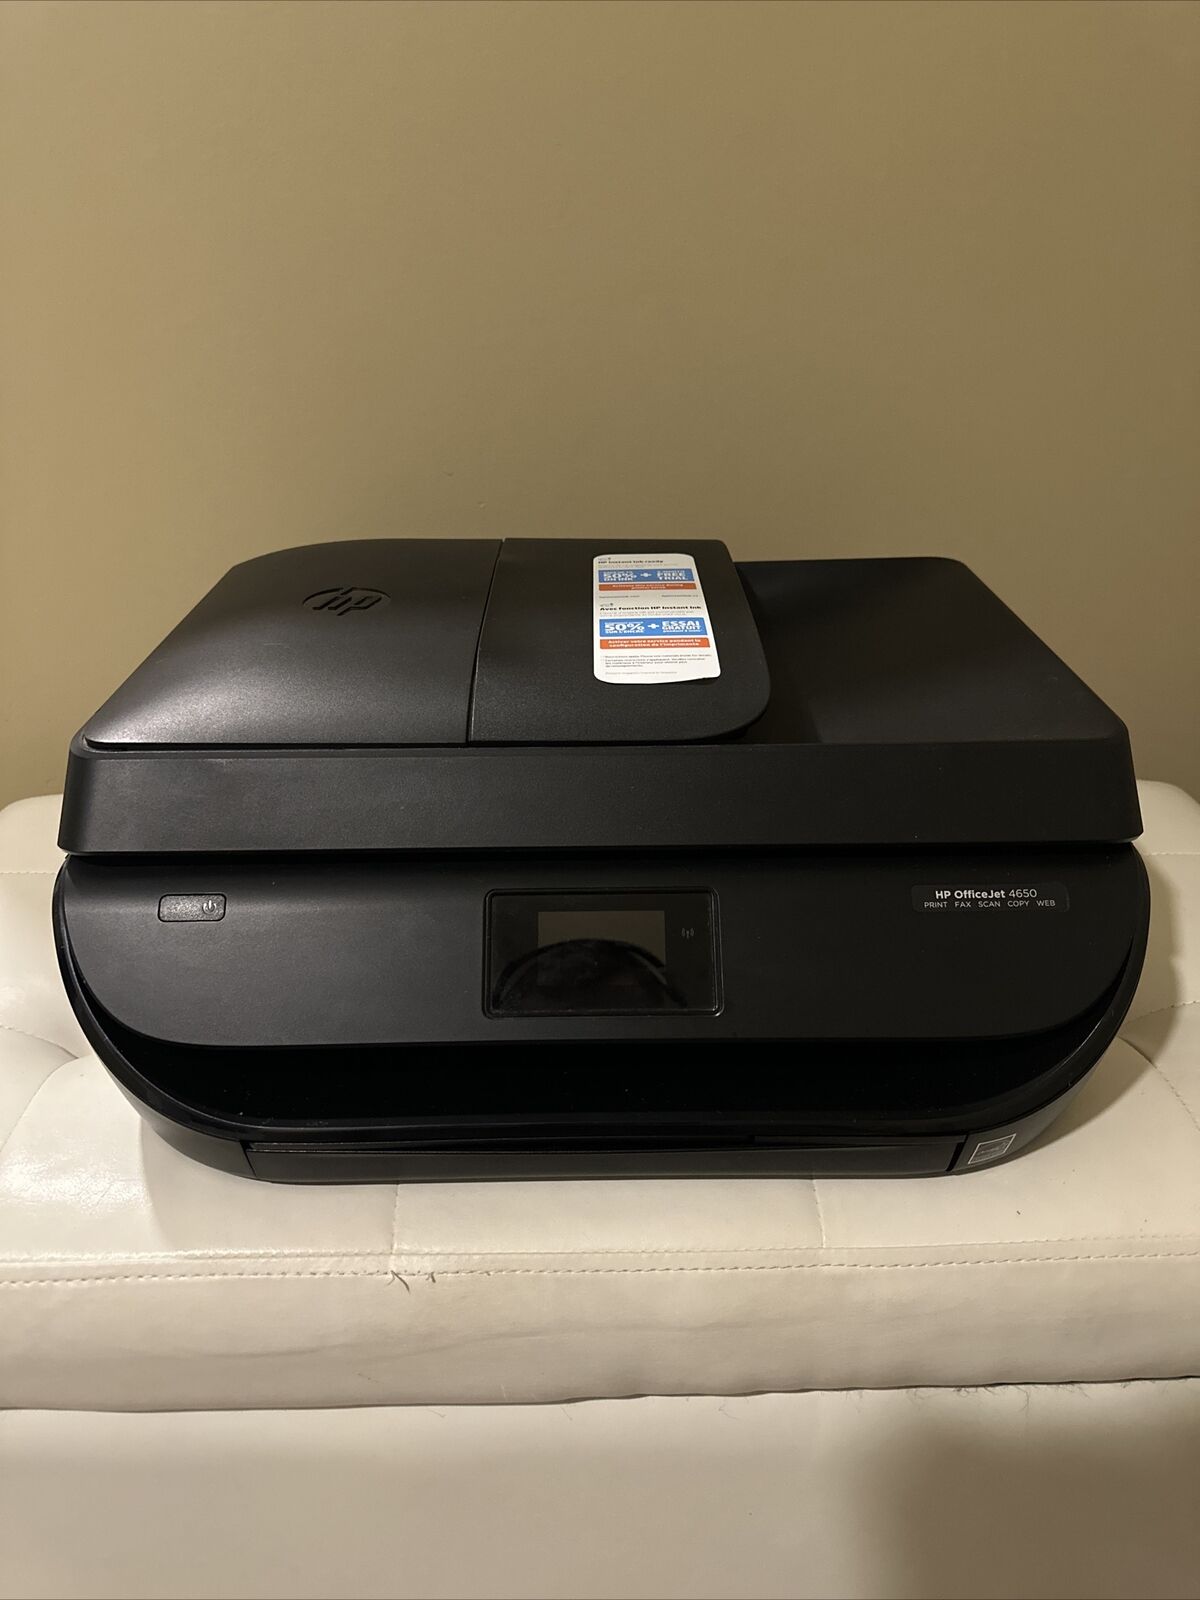 HP OfficeJet 4650 4655 All-in-One Printer Tested Works Medium Ink Level